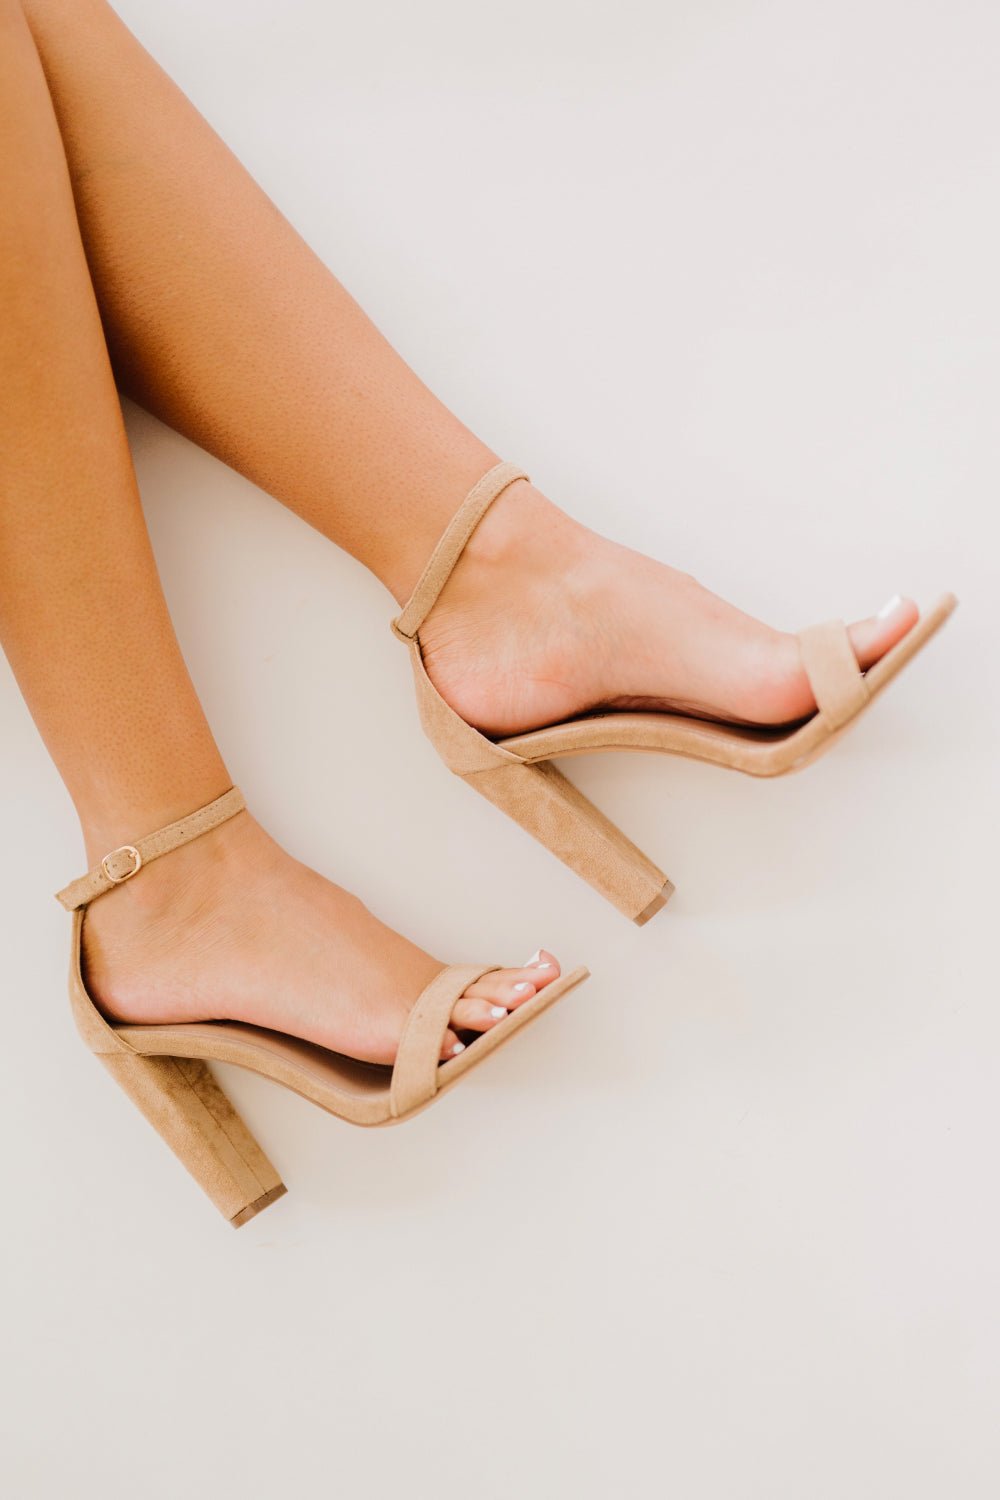 KAYLEEN Standing Tall Square Toe Block Heel Sandals in Taupe - Fashion Girl Online Store